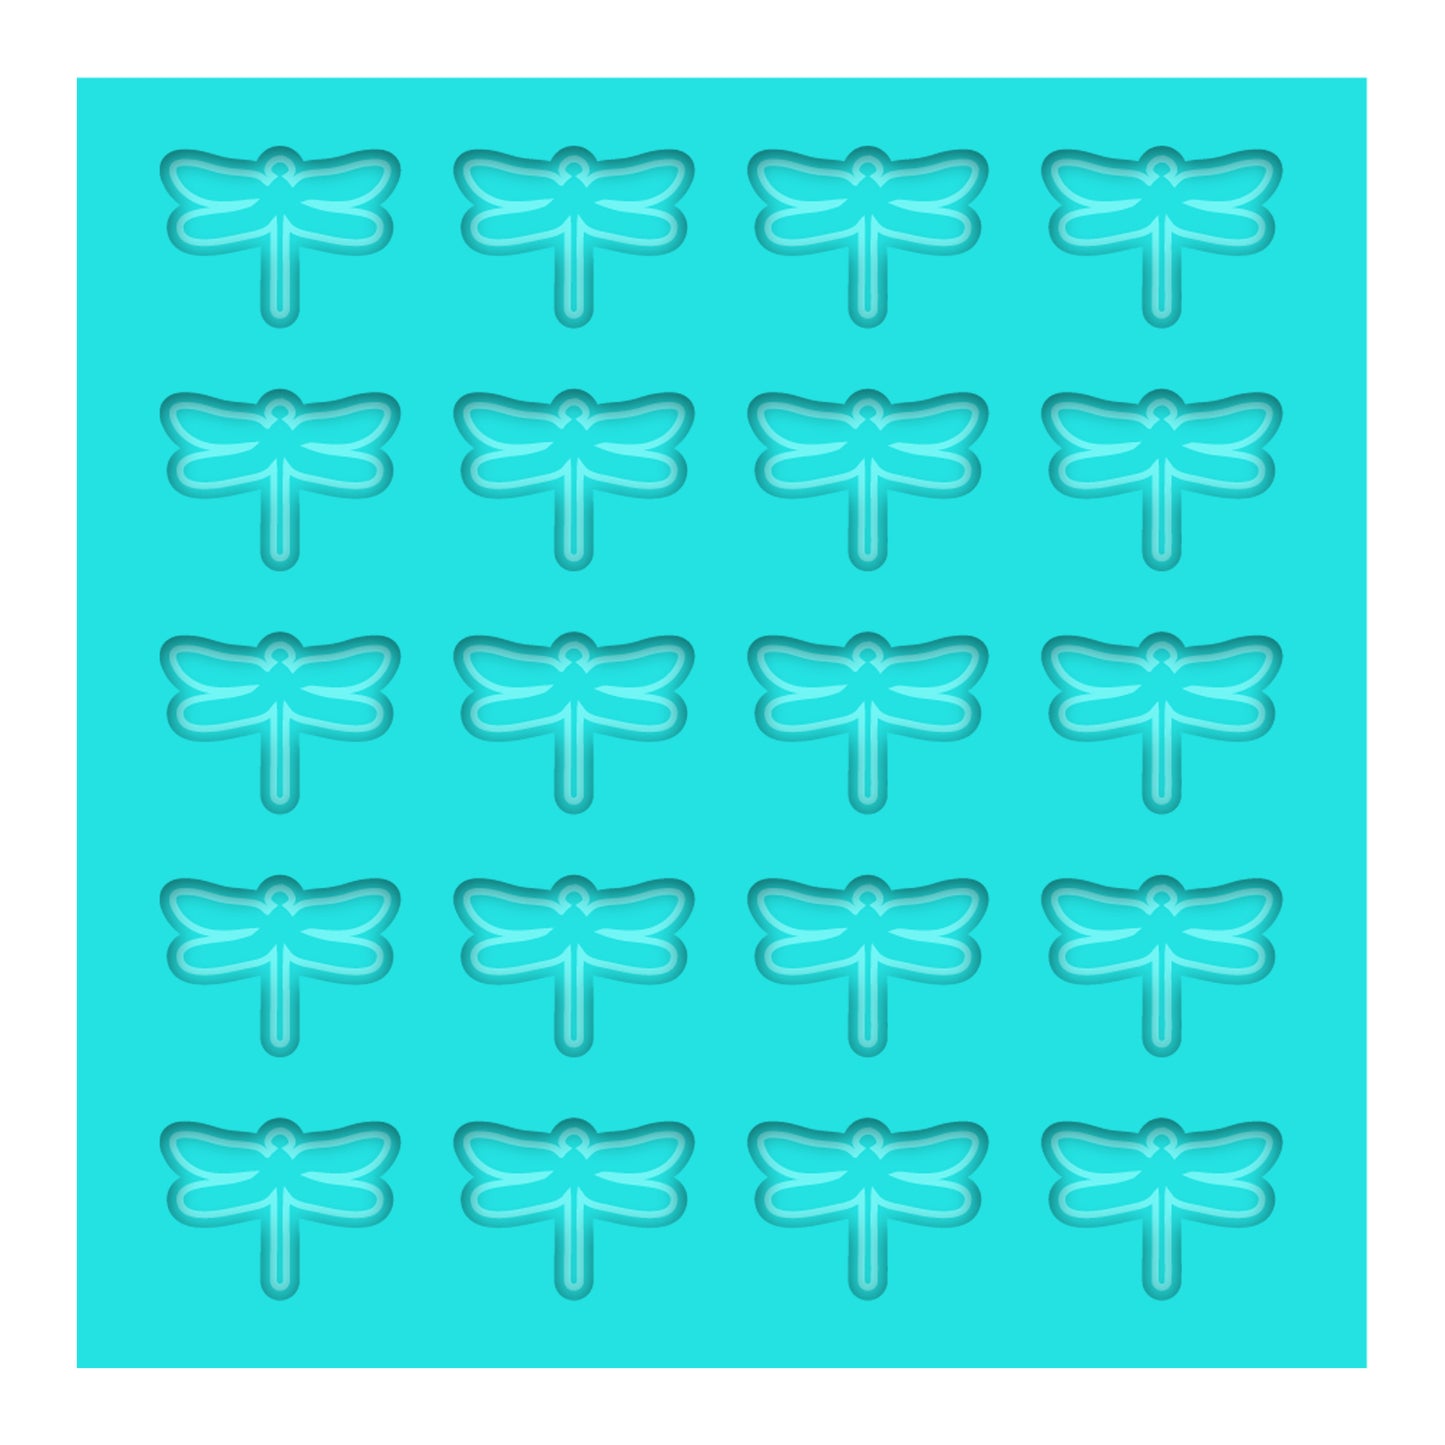 a pattern of dragonflies on a blue background